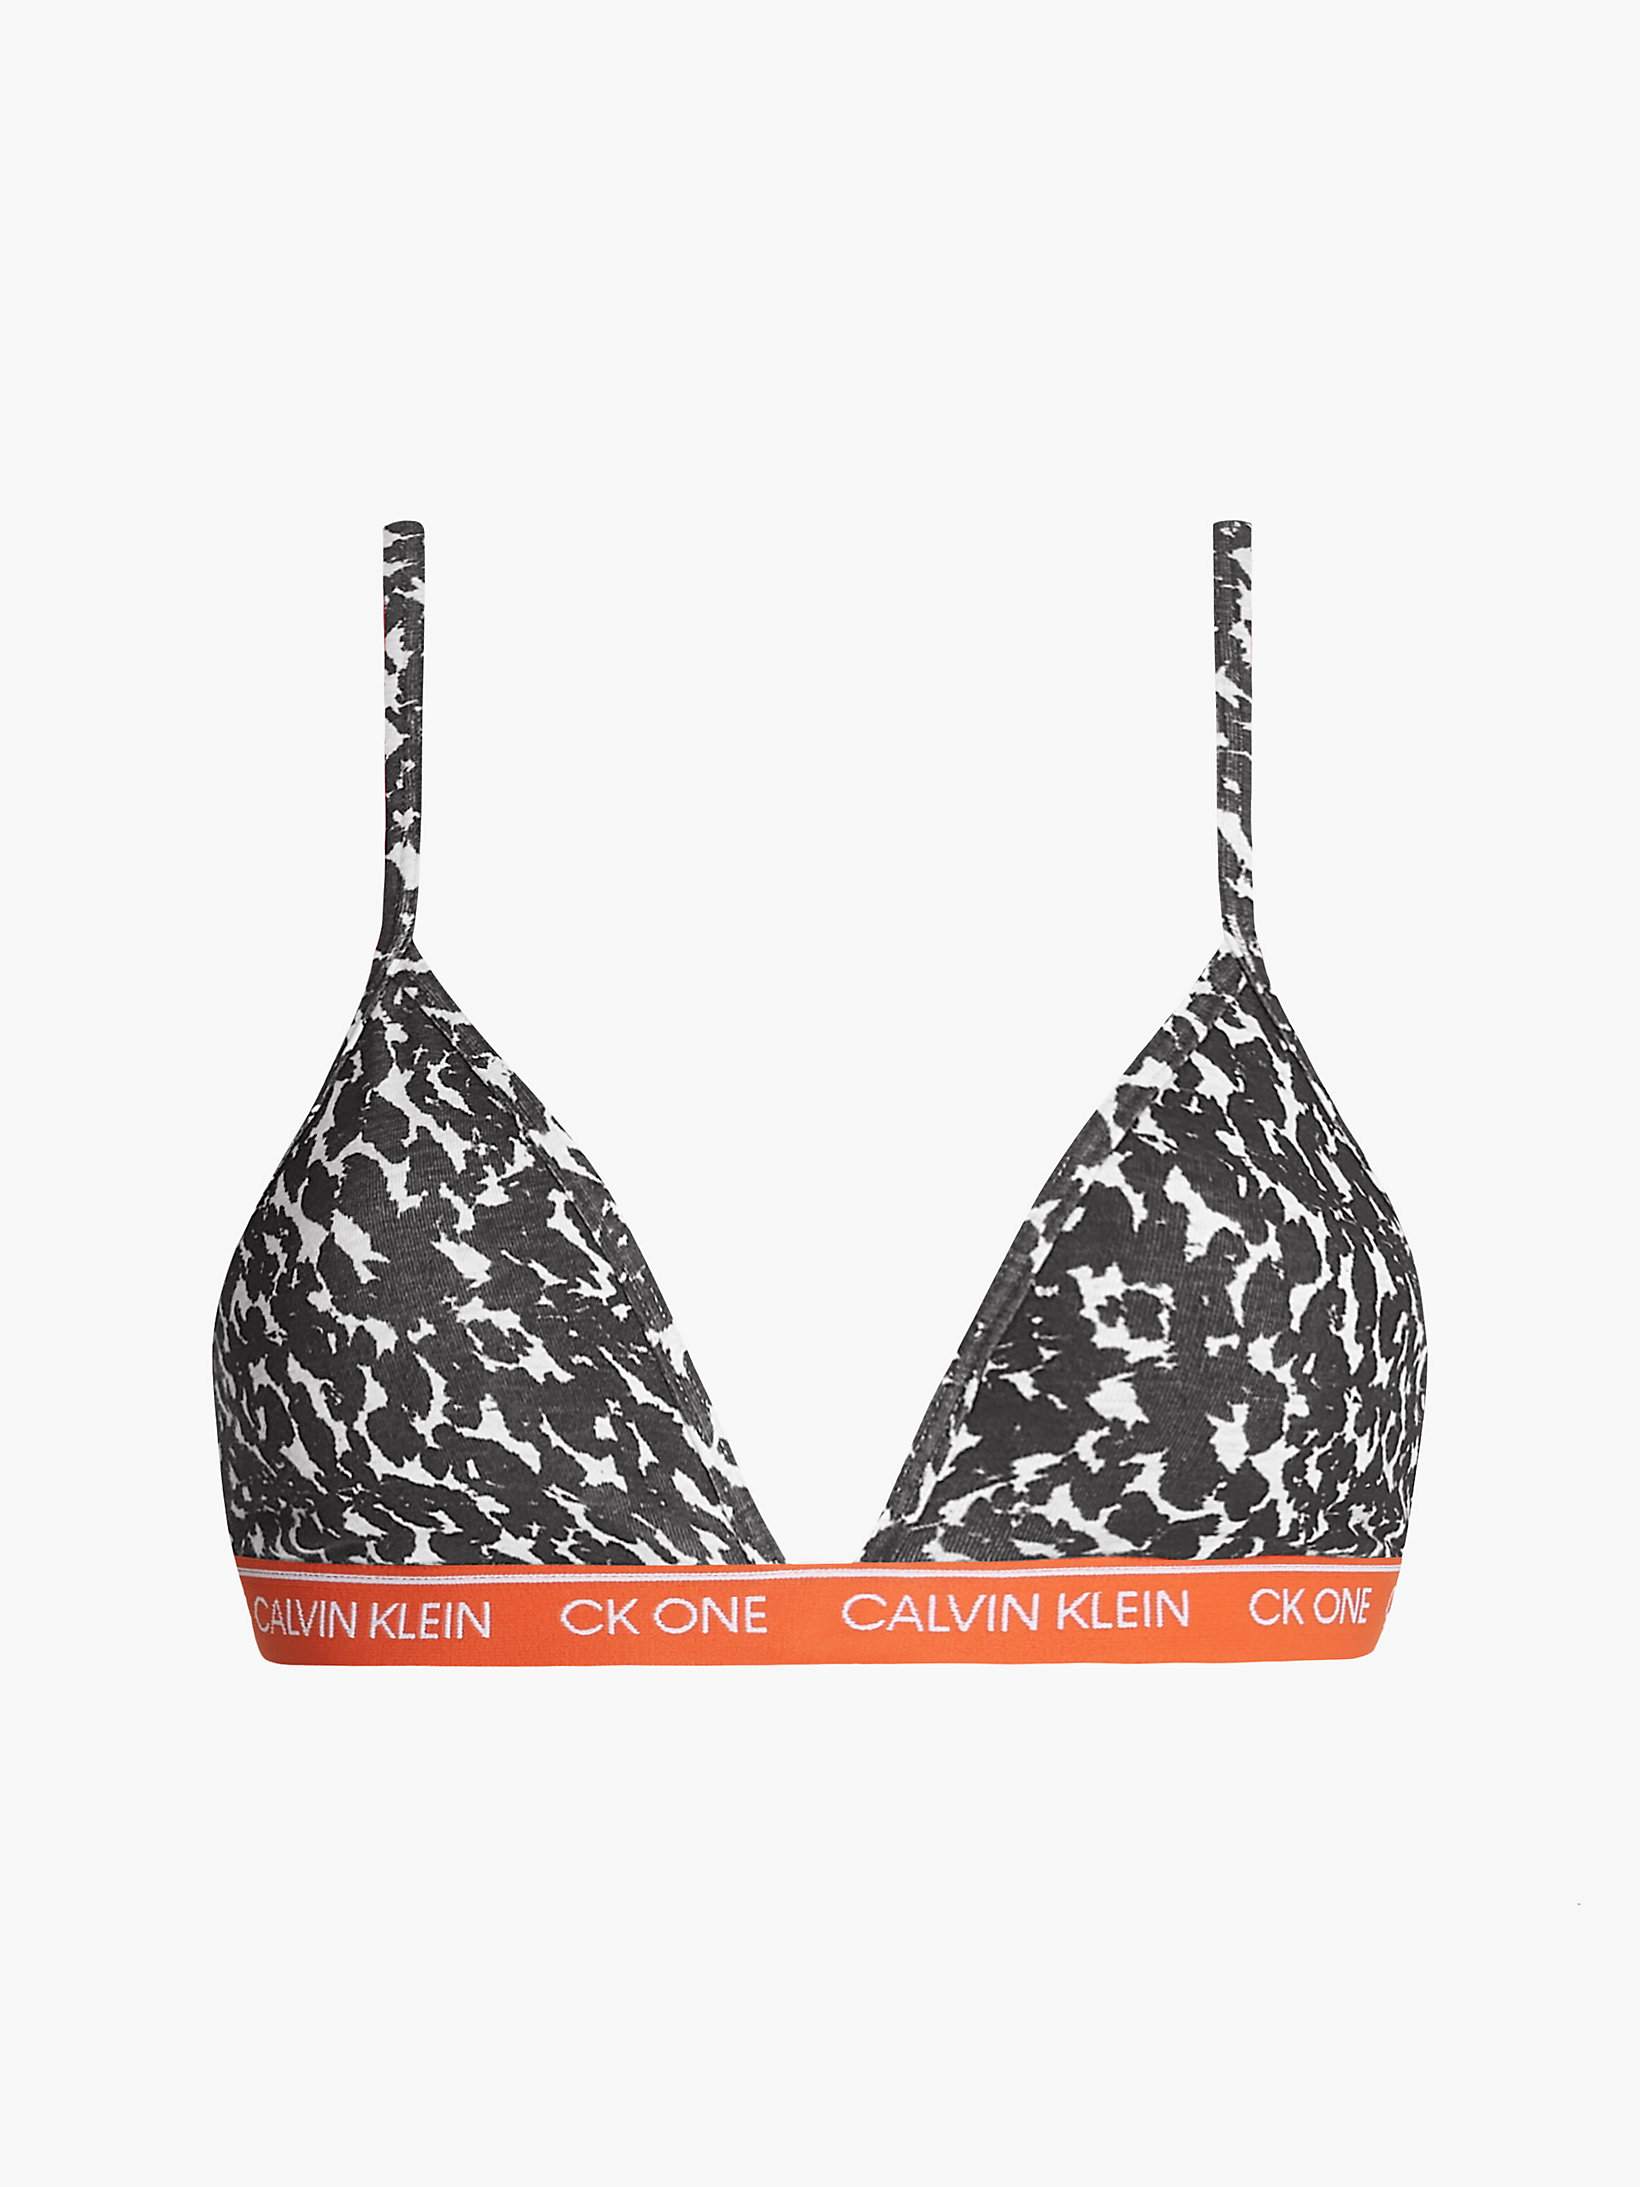 Soutien-Gorge Triangle - CK One > Distorted Animal - Oatmeal Heather > undefined femmes > Calvin Klein